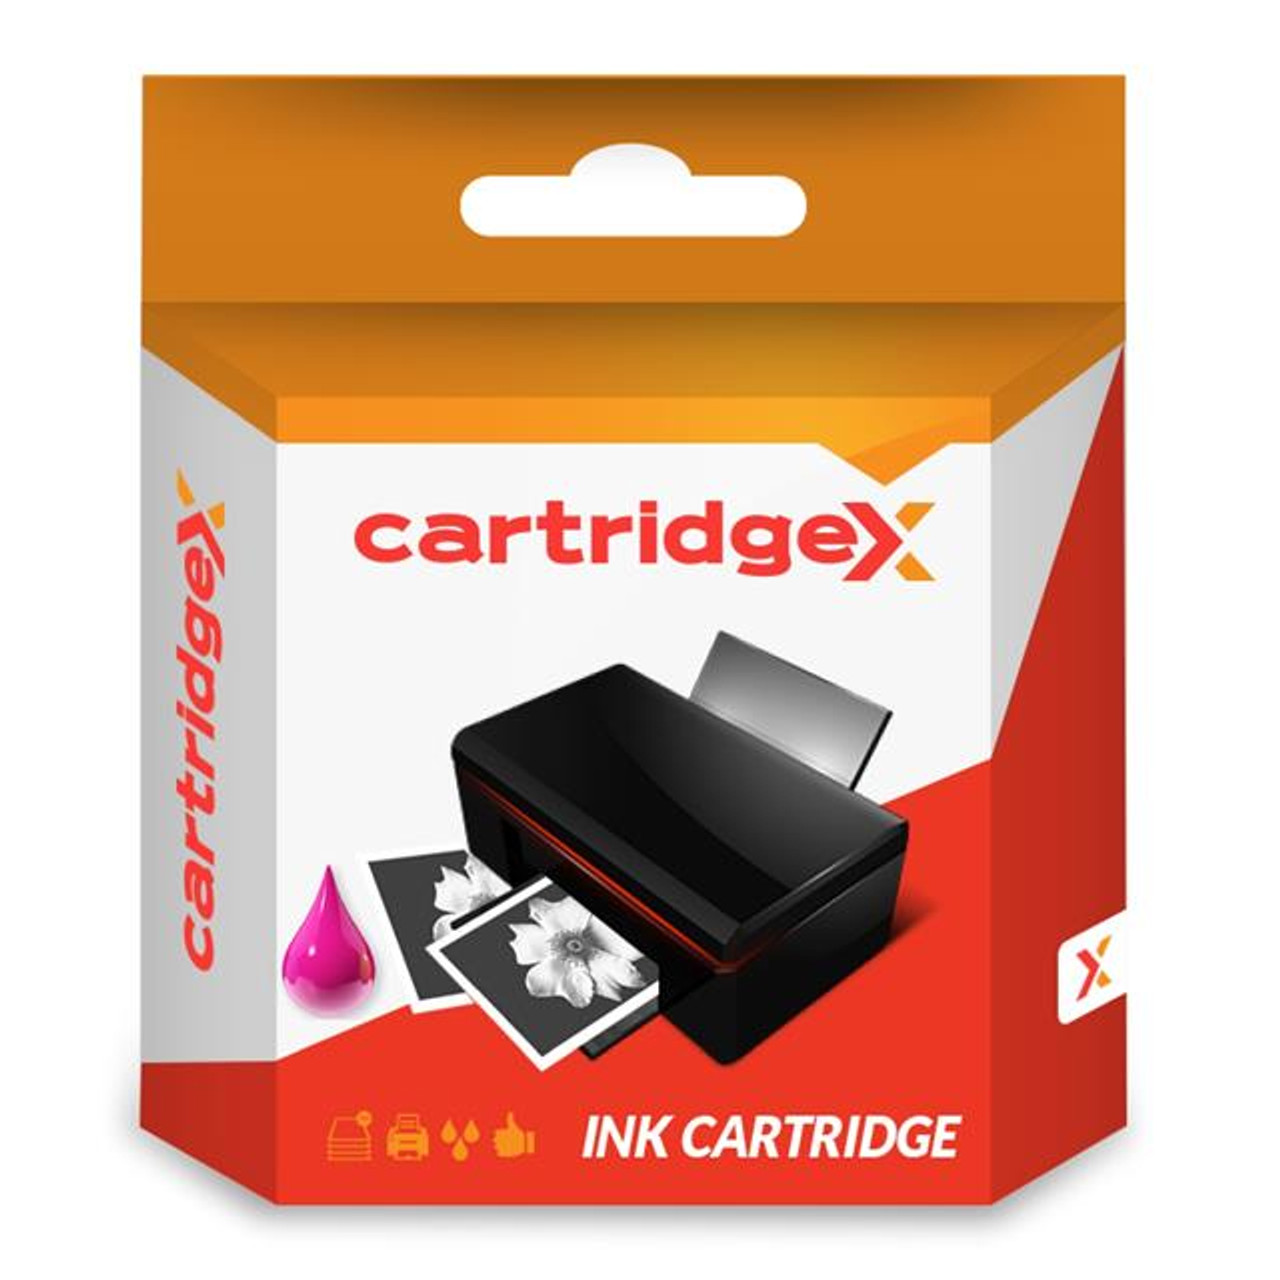 Compatible Magenta Ink Cartridge Compatible With Epson Stylus Pro 9800 7880 7800